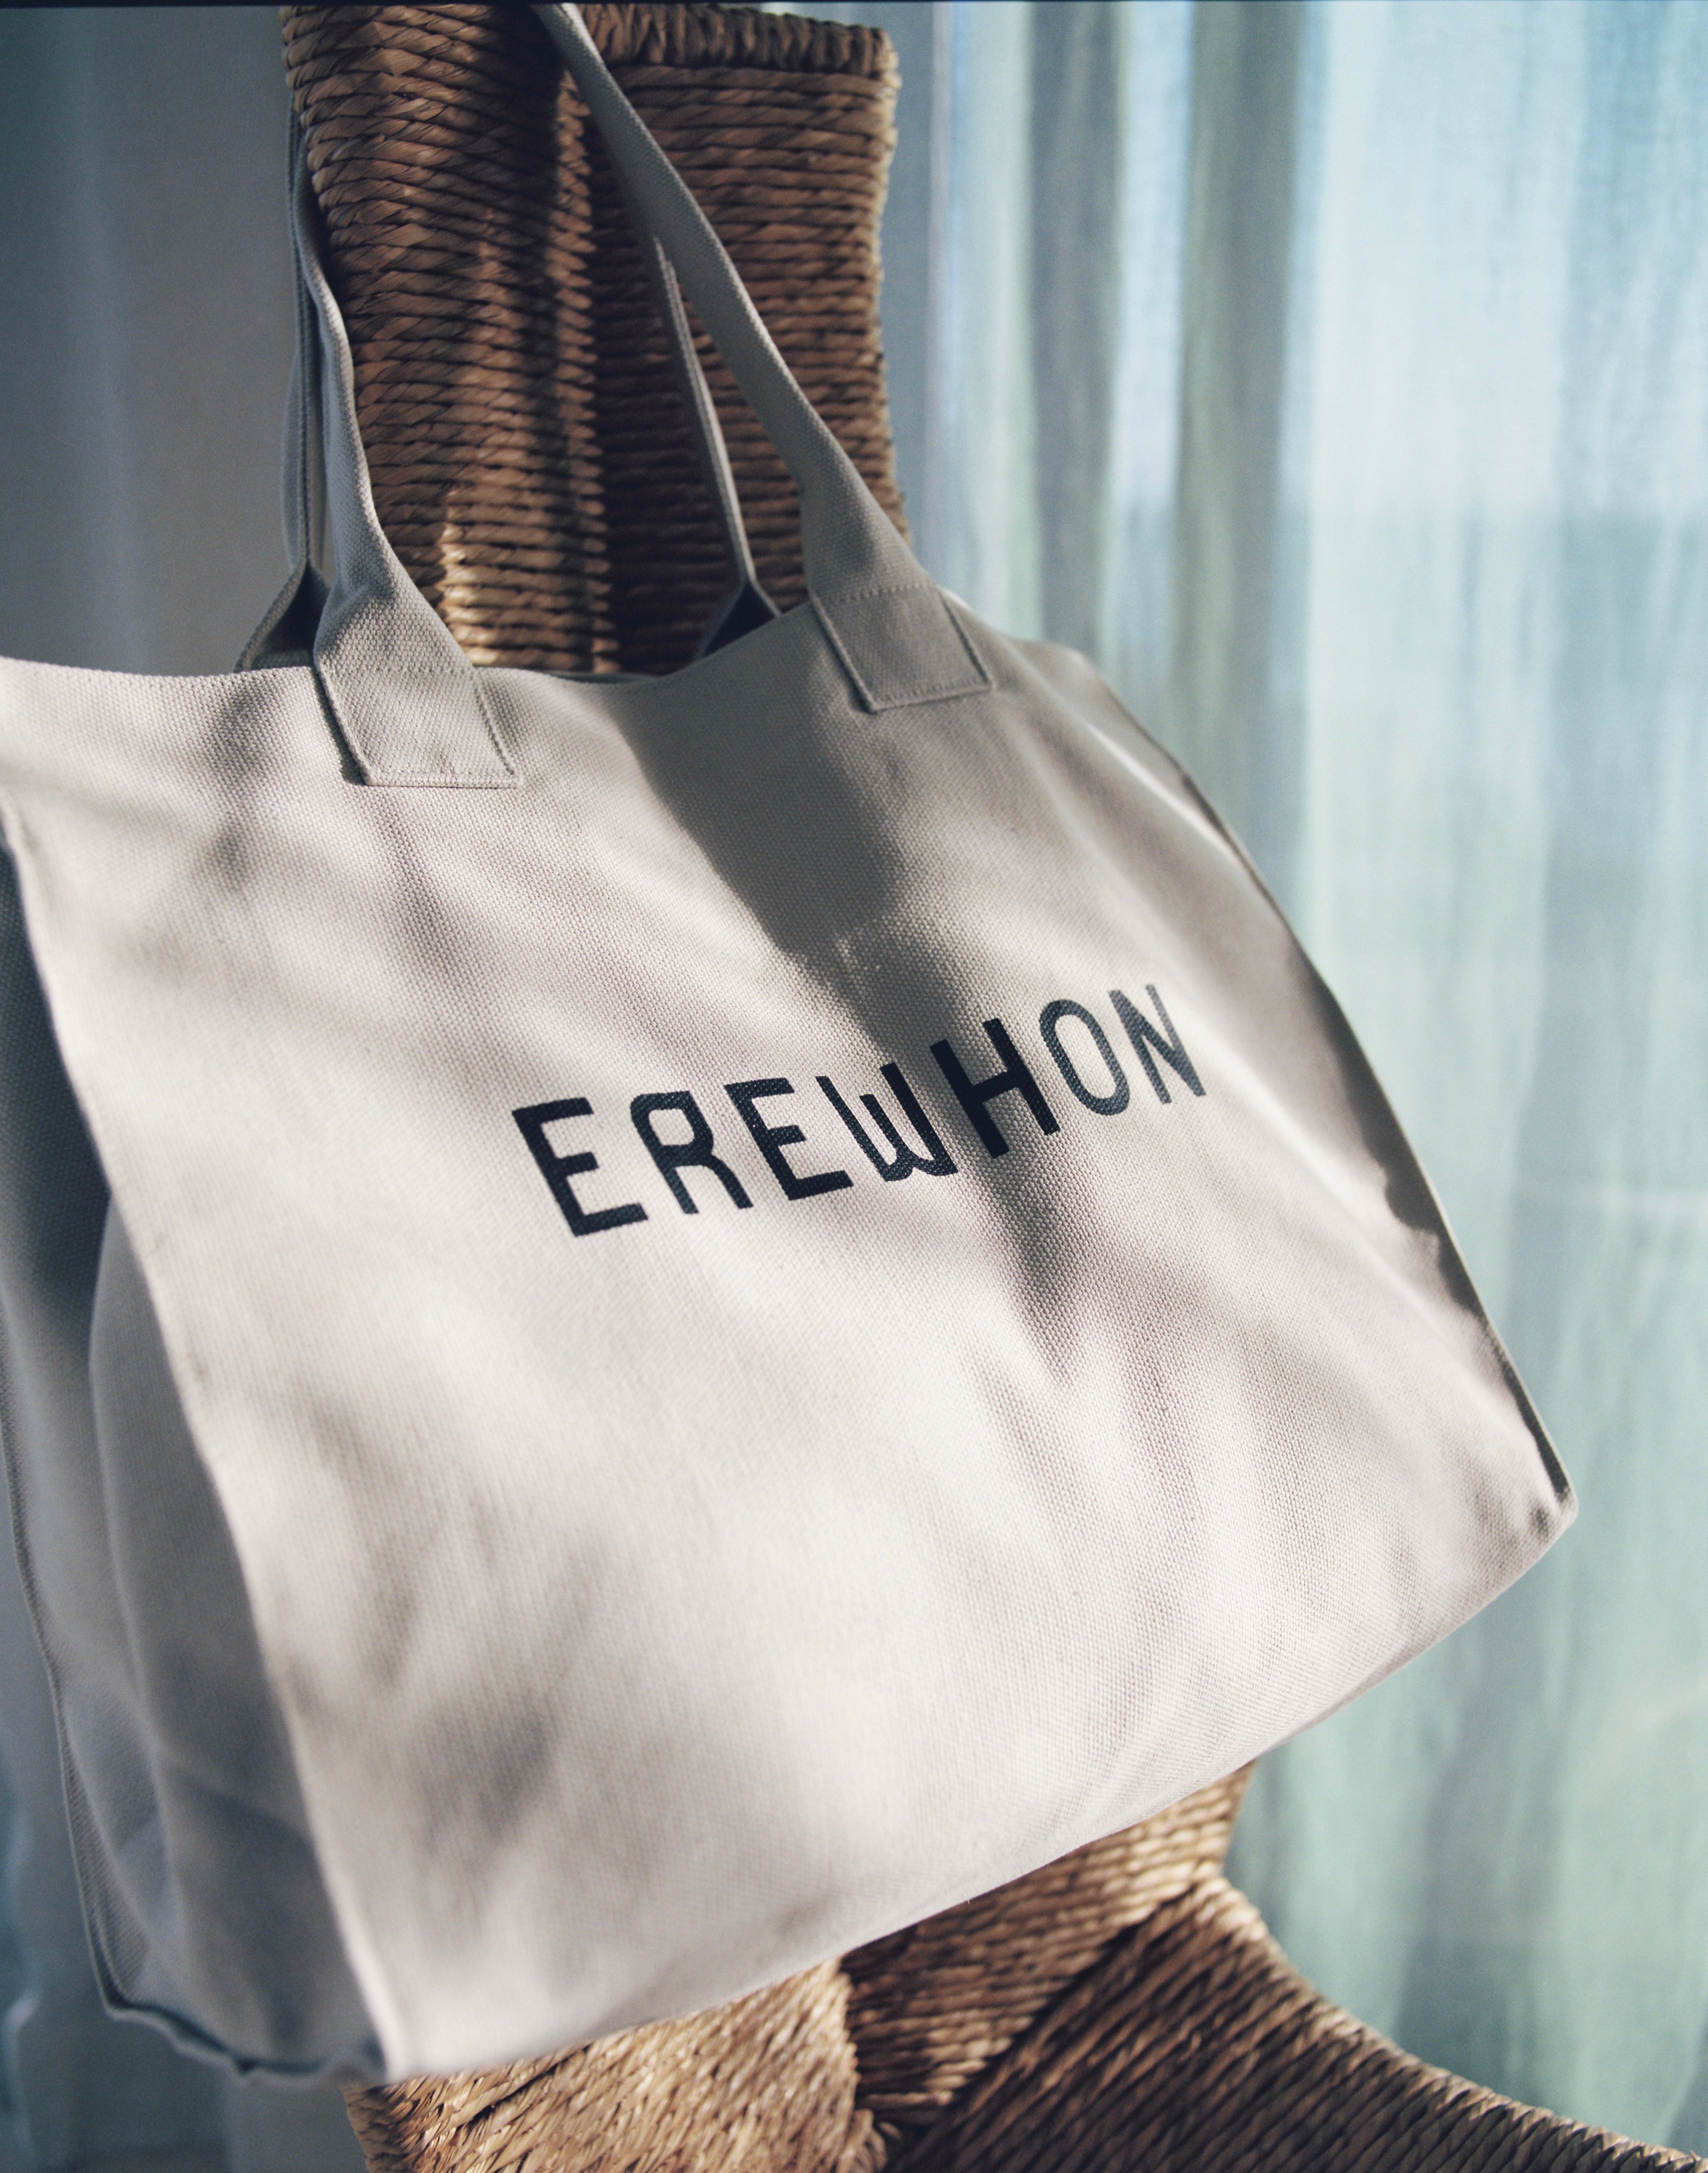 Shop the Erewhon Bag Collection | Exclusively at Erewhon